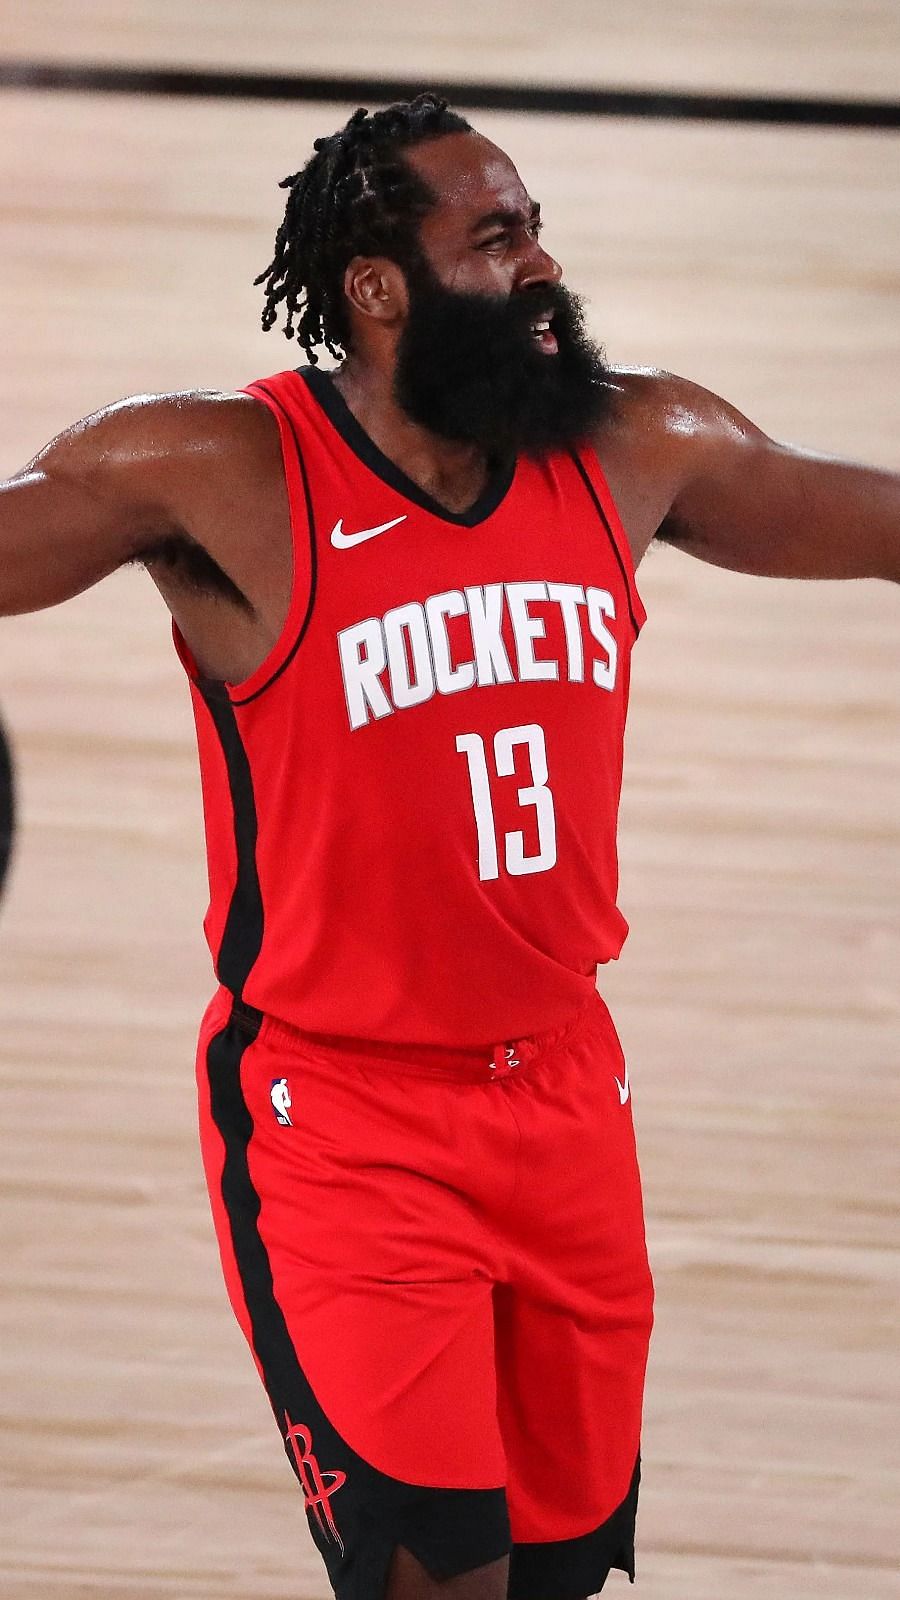 Nba Trade Rumors The Case For And Against The Brooklyn Nets Acquiring James Harden This Off Season